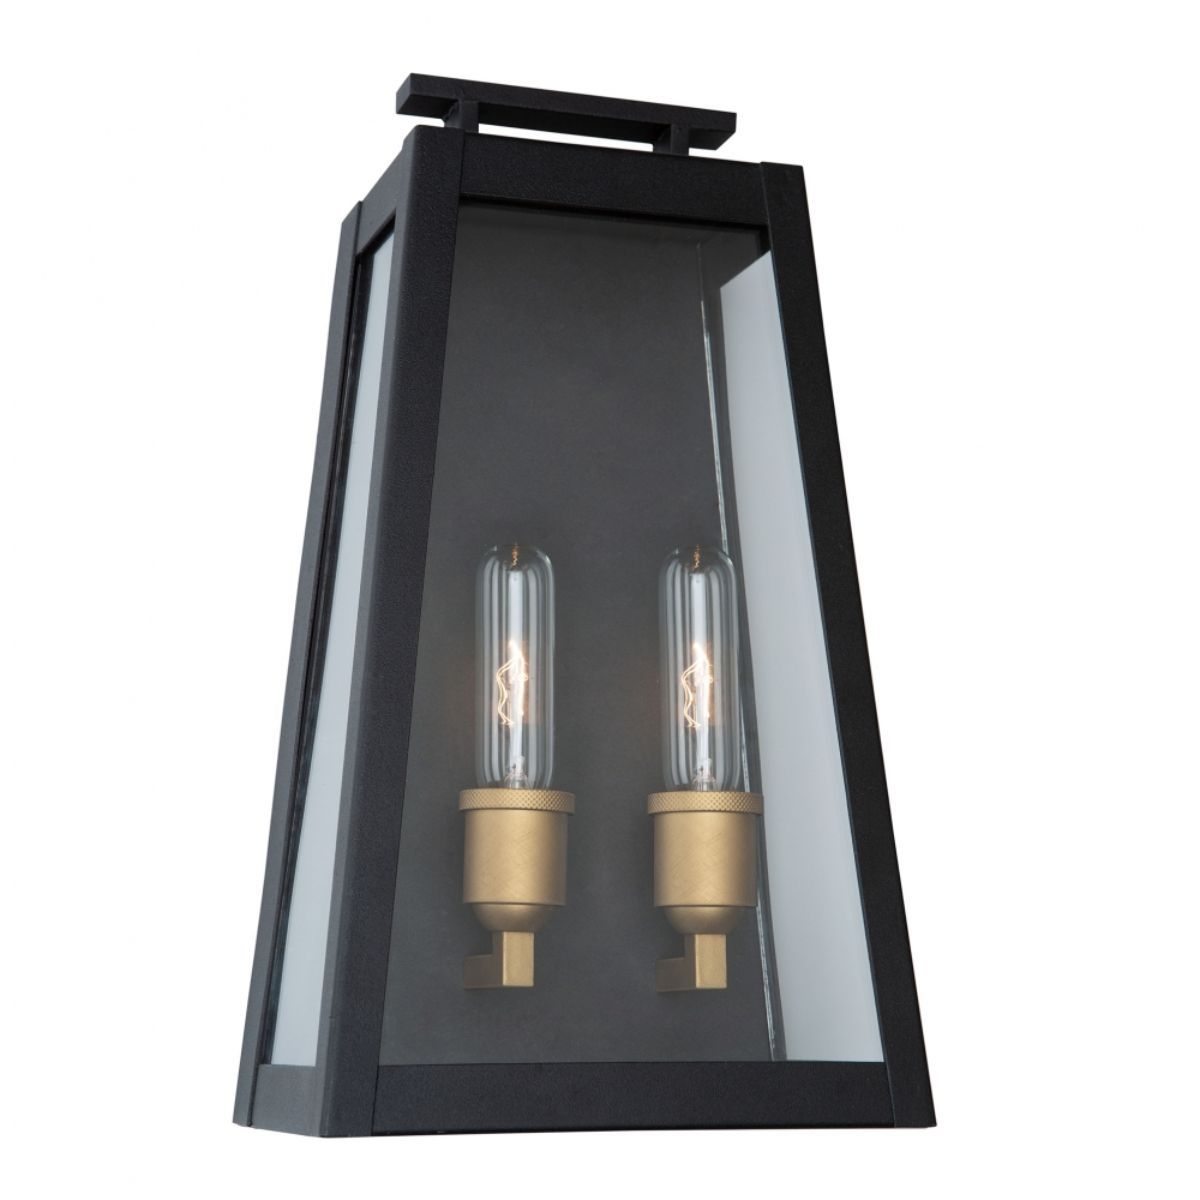 Charlestown 16 in. 2 Lights Outdoor Wall Sconce Black Finish